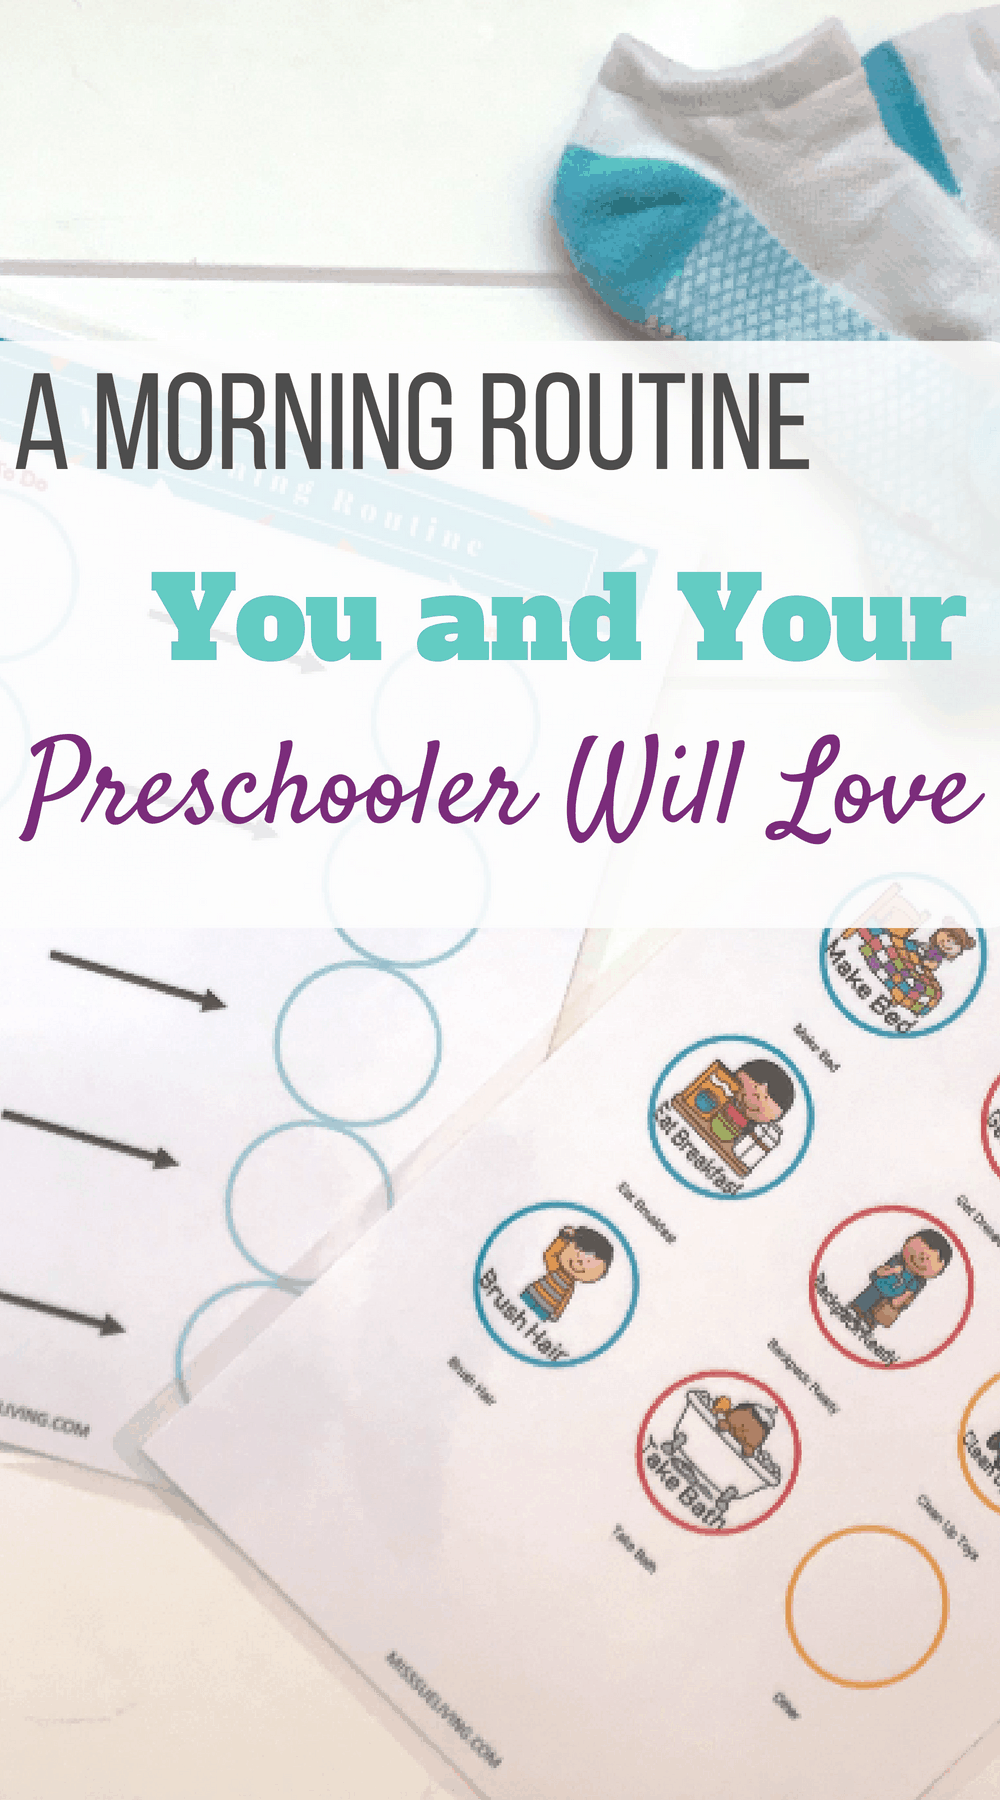 A Morning Routine You and Your Preschooler Can Love, preschool morning routine, preschool morning routine chart, morning routine for kids, morning routine for toddlers, child routine chart, morning routine for school, morning routine chart printable, morning routine checklist #kidsmorningroutine #morningroutines #chorechart #preschoolmornings